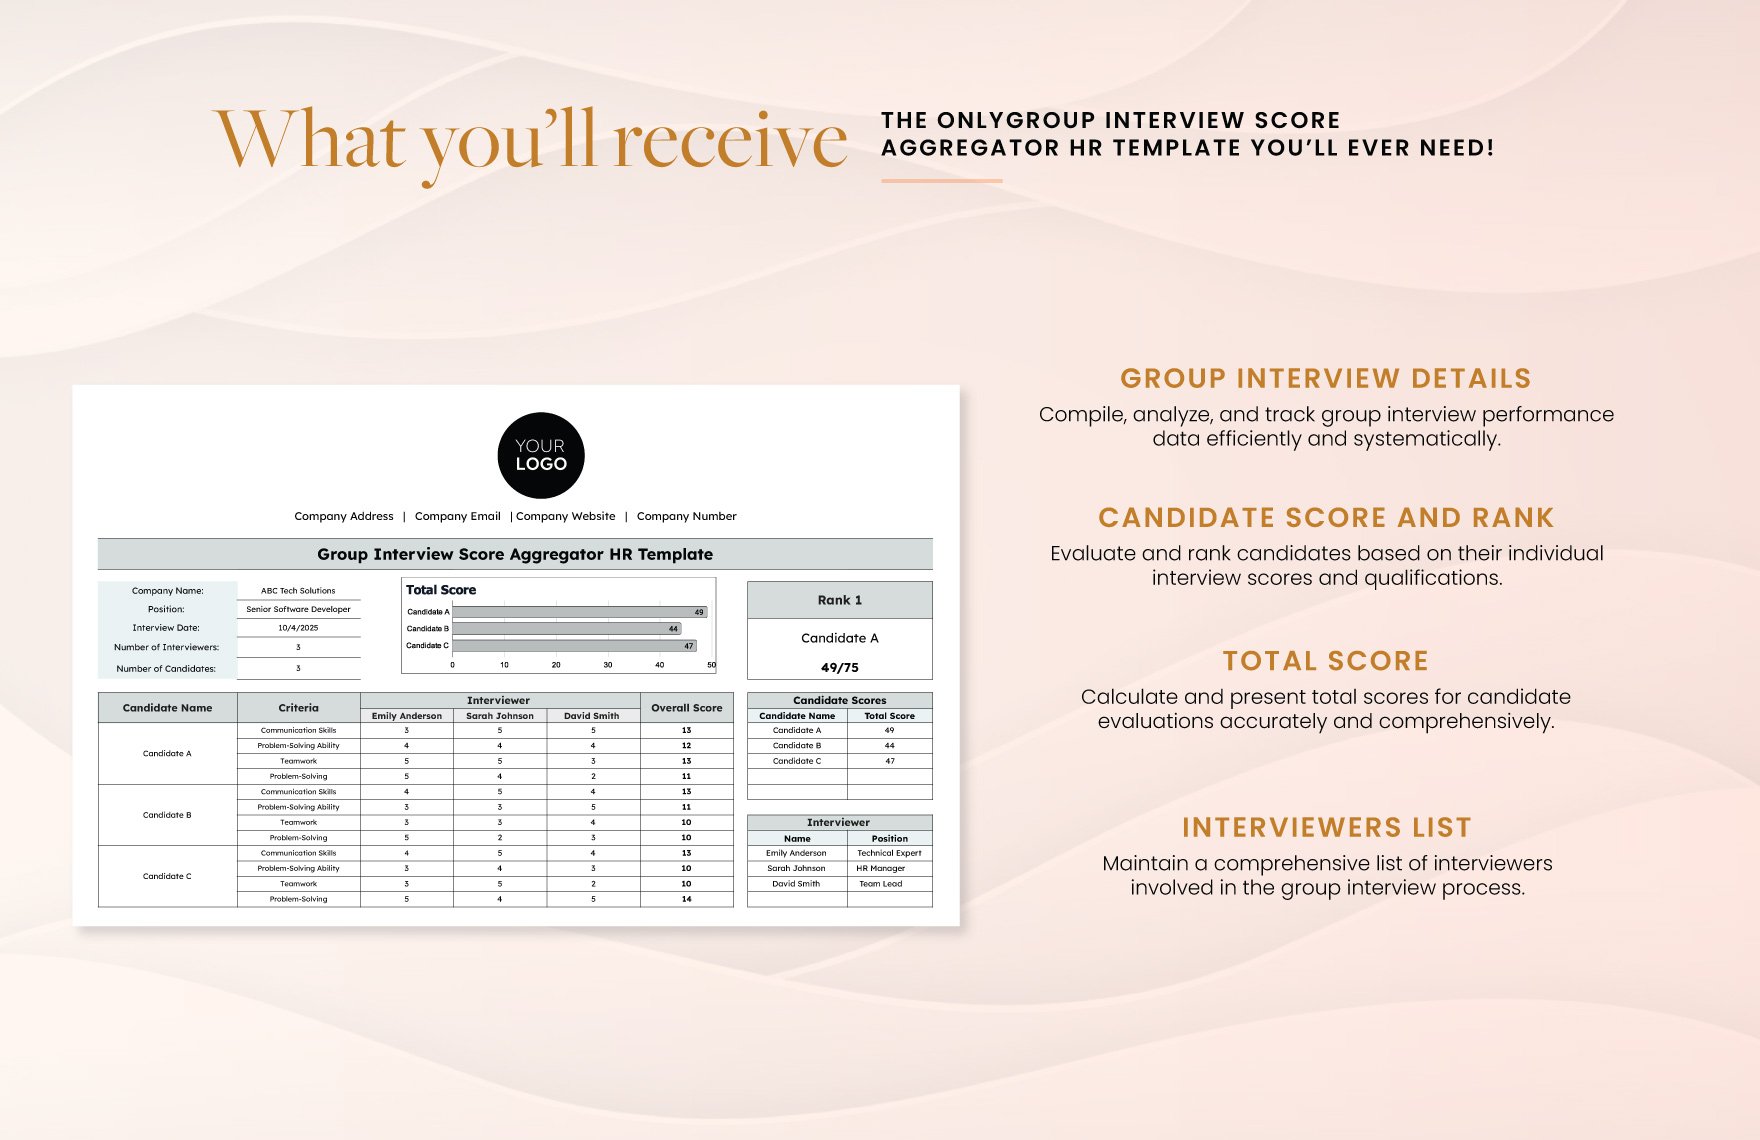 Group Interview Score Aggregator HR Template